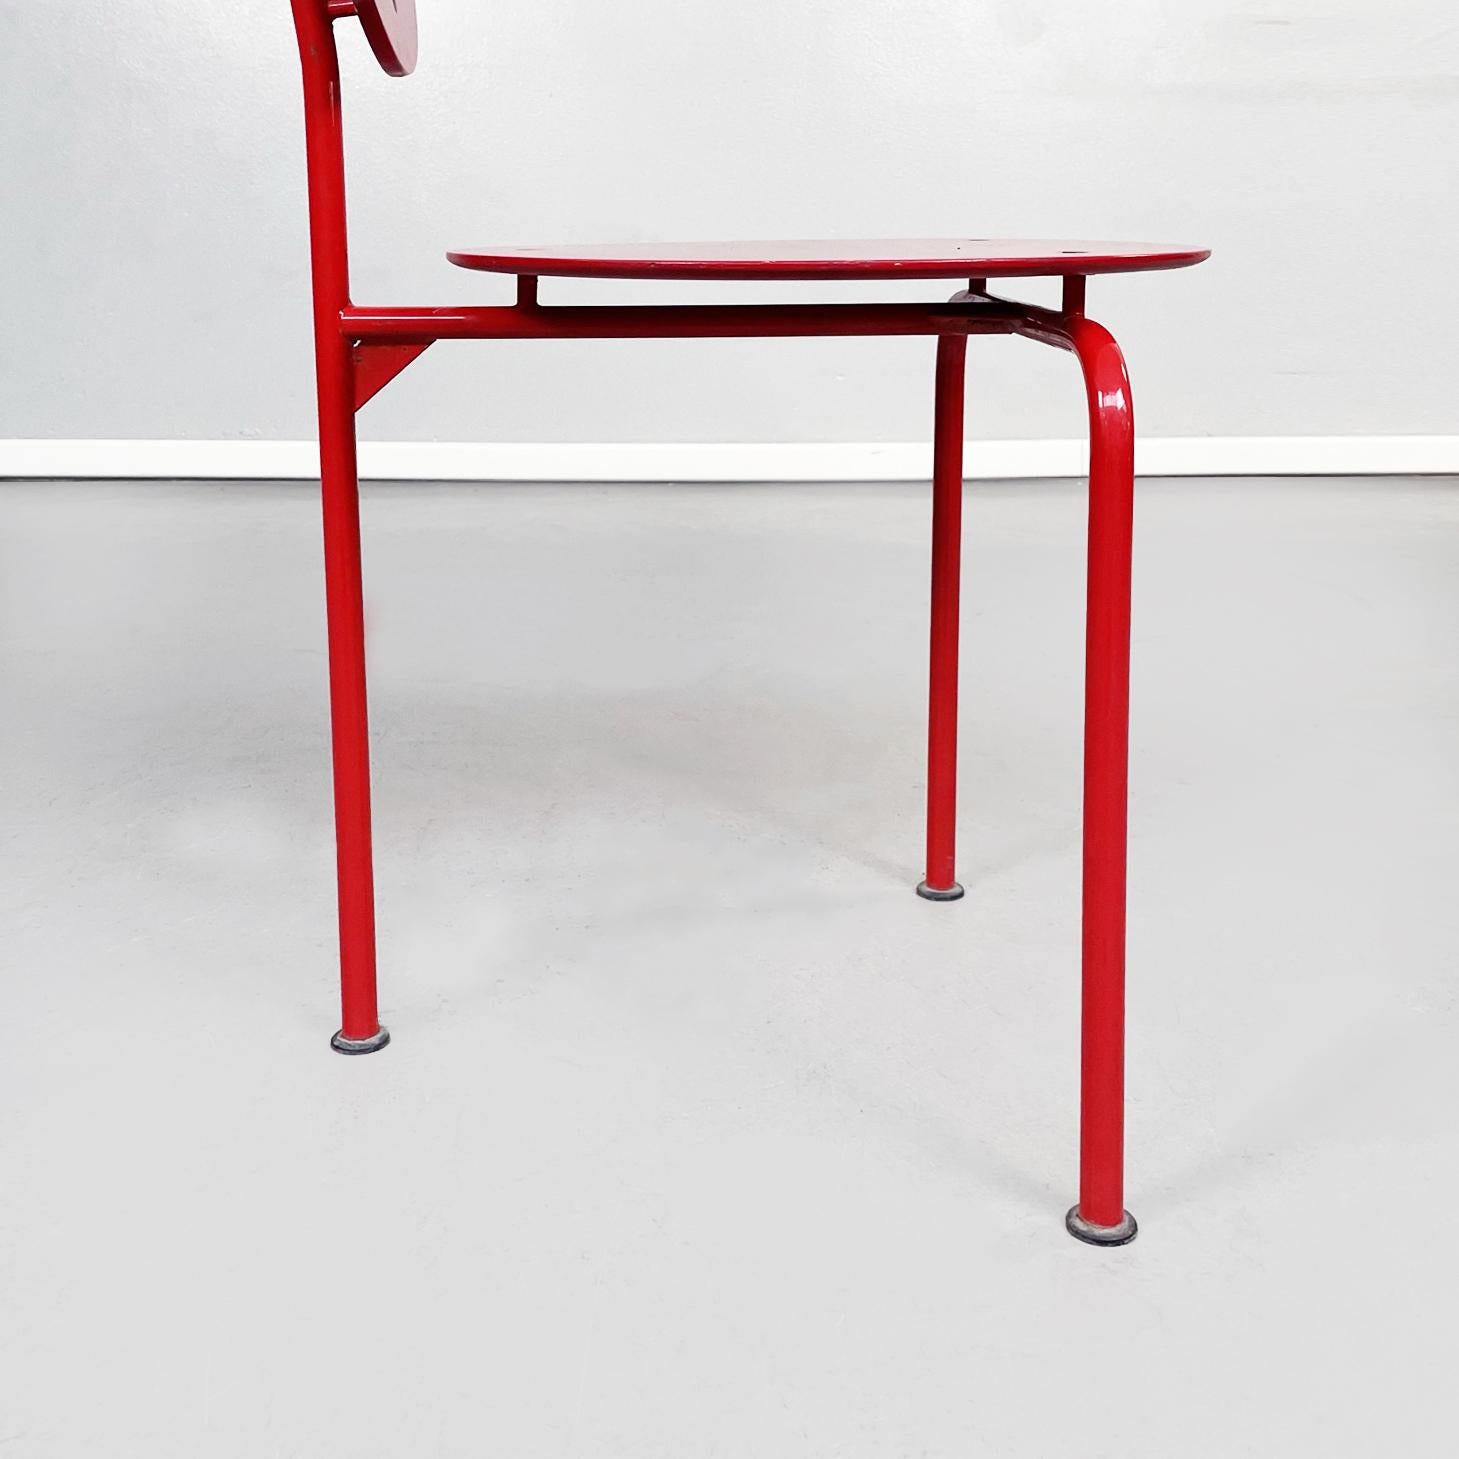 Italian Mid-Century Red Wood and Metal Alien Chair by Forcolini for Alias, 1980s For Sale 9